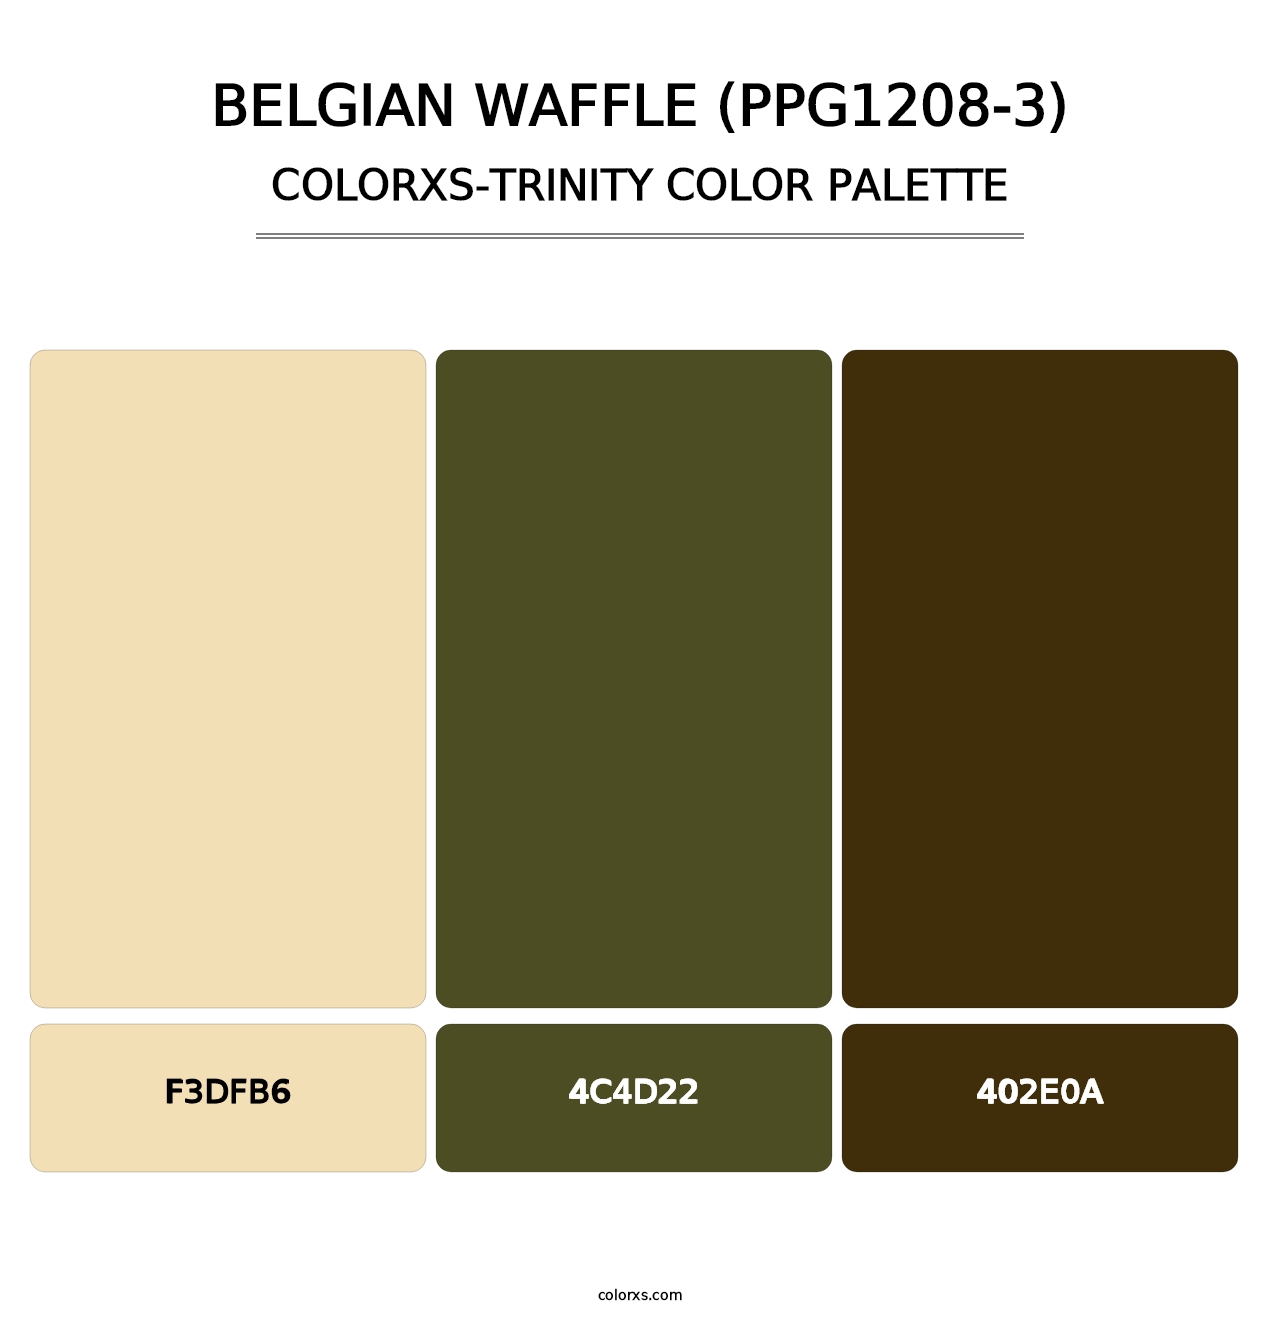 Belgian Waffle (PPG1208-3) - Colorxs Trinity Palette